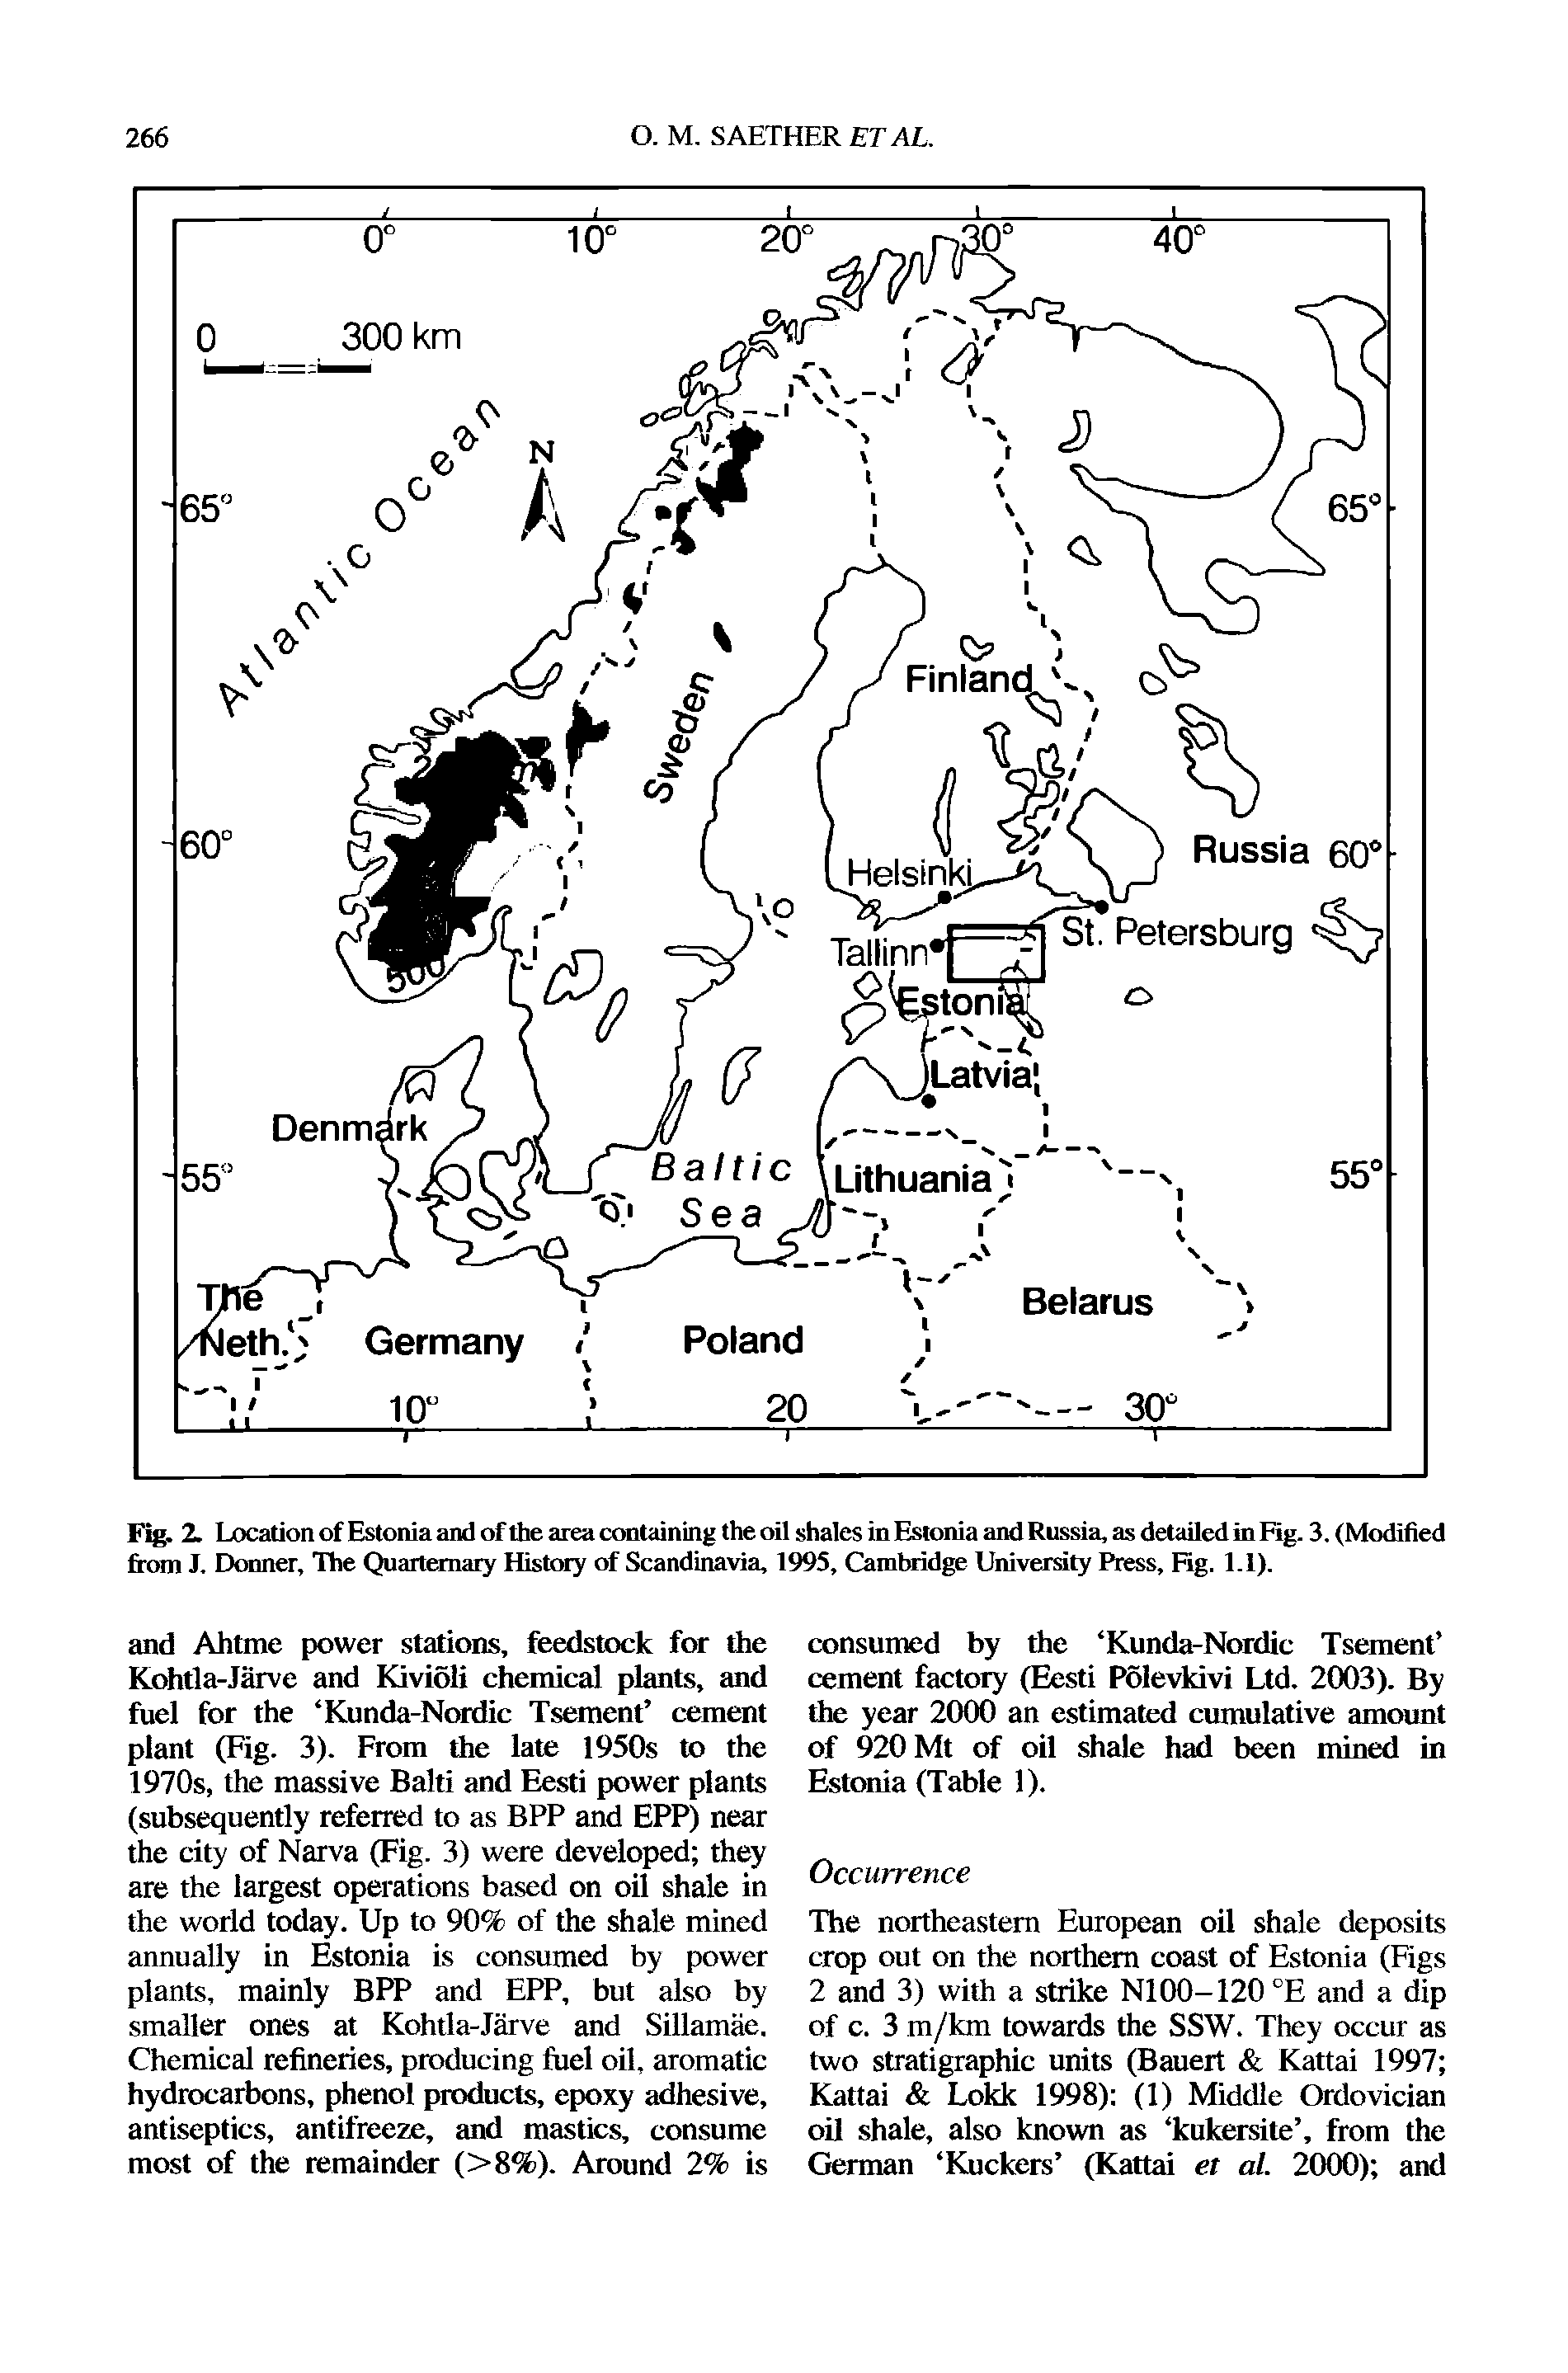 Fig. 2. Location of Estonia and of the area containing the oil shales in Estonia and Russia, as detailed in Fig. 3. (Modified from J. Donner, The Quartemary History of Scandinavia, 1995, Cambridge University Press, Fig. 1.1).